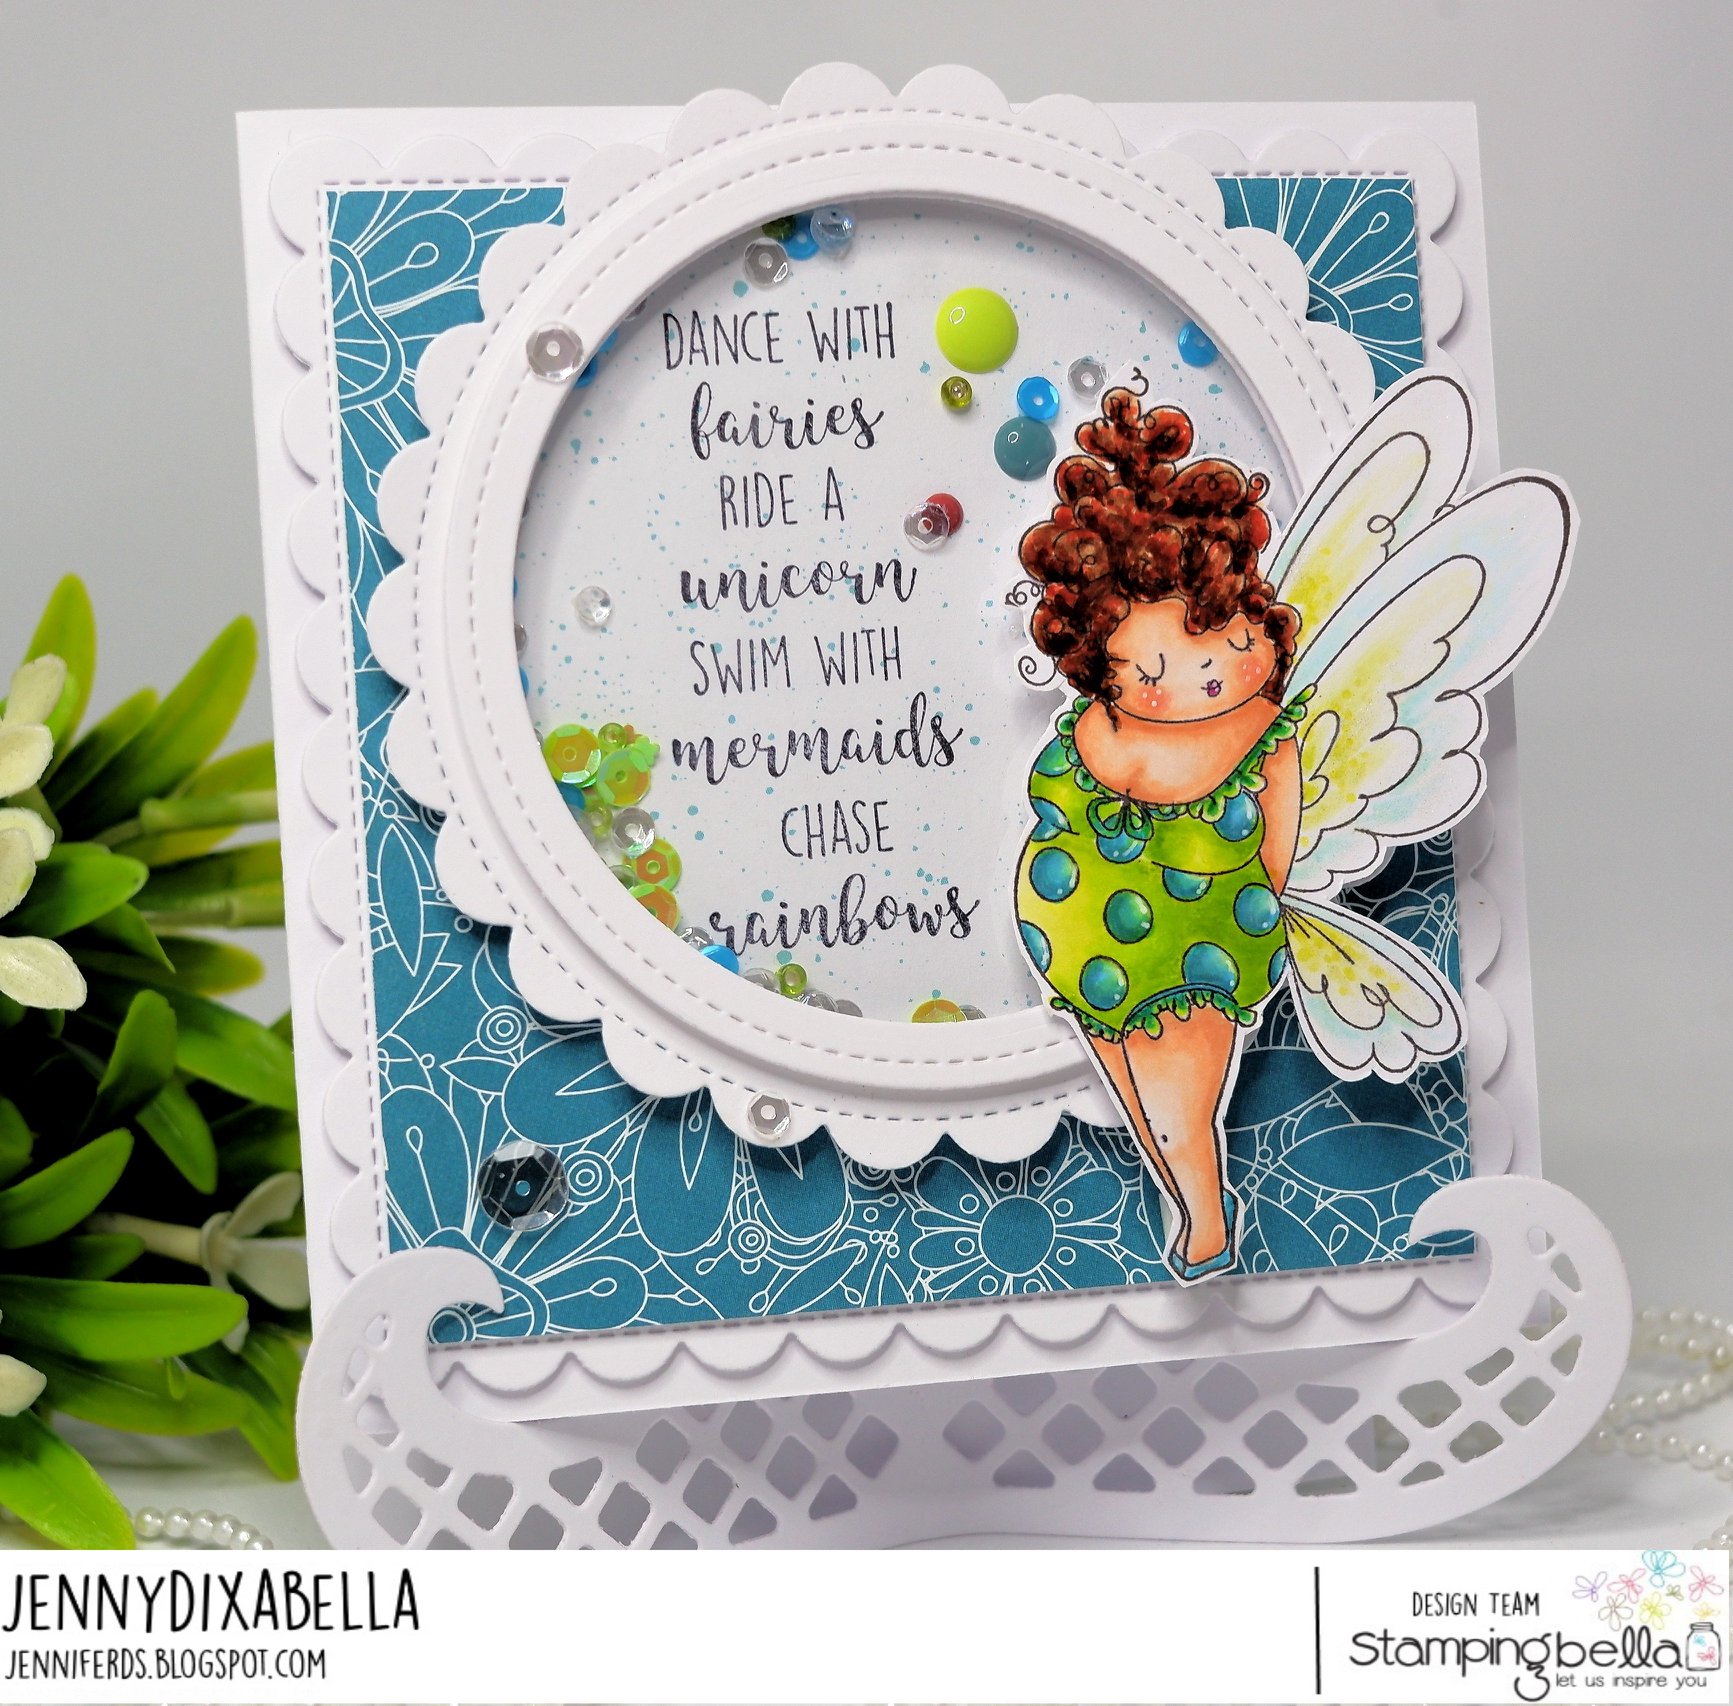 www.stampingbella.com: rubber stamp used:  MEET EDNA. Card by JENNY DIX